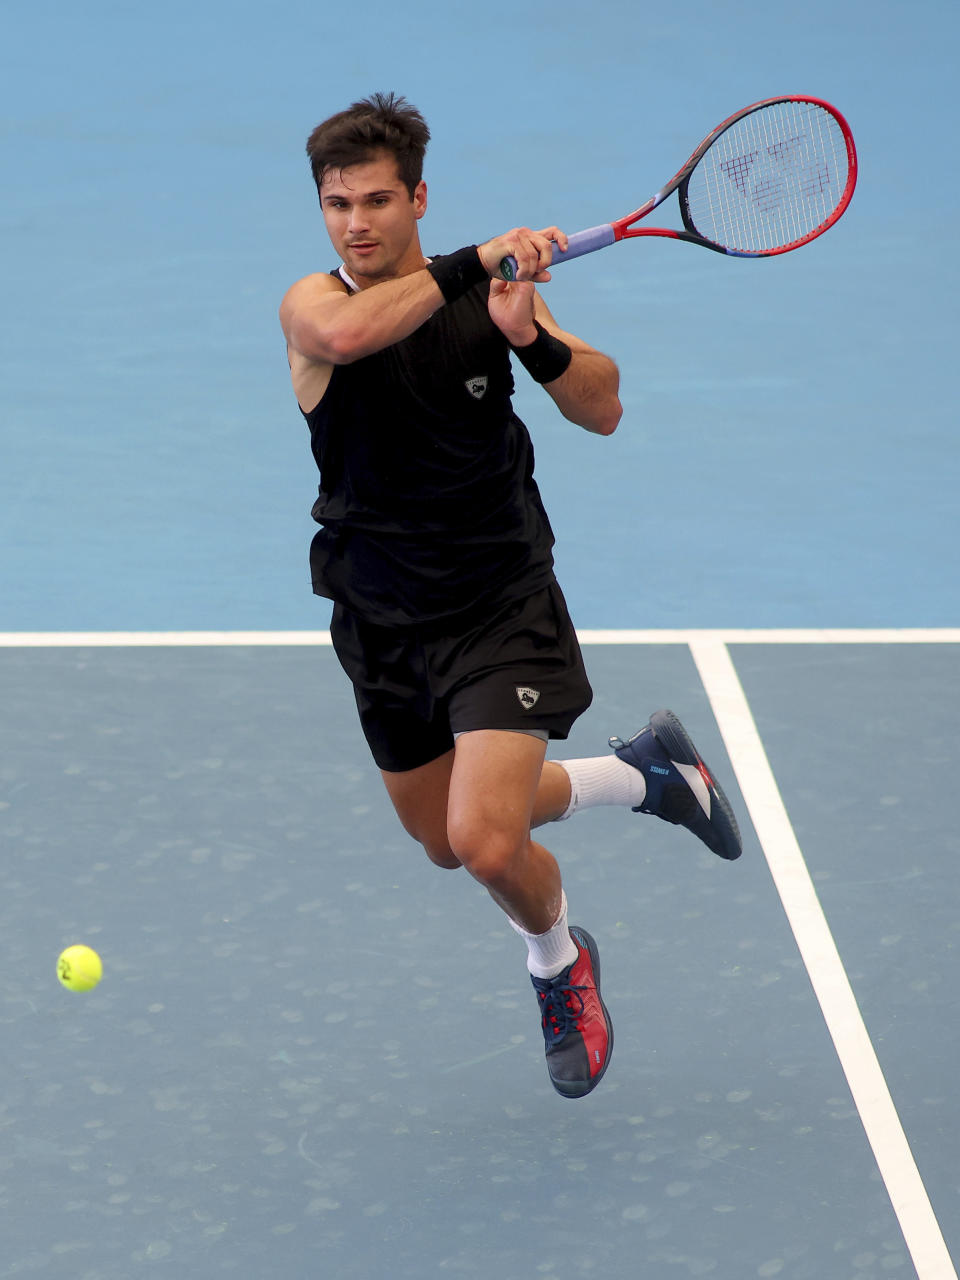 Marcos Giron of the United States makes a forehand return to Richard Gasquet of France during their Round of 32 match at the Adelaide International Tennis tournament in Adelaide, Australia, Sunday, Jan. 1, 2023. (AP Photo/Kelly Barnes)